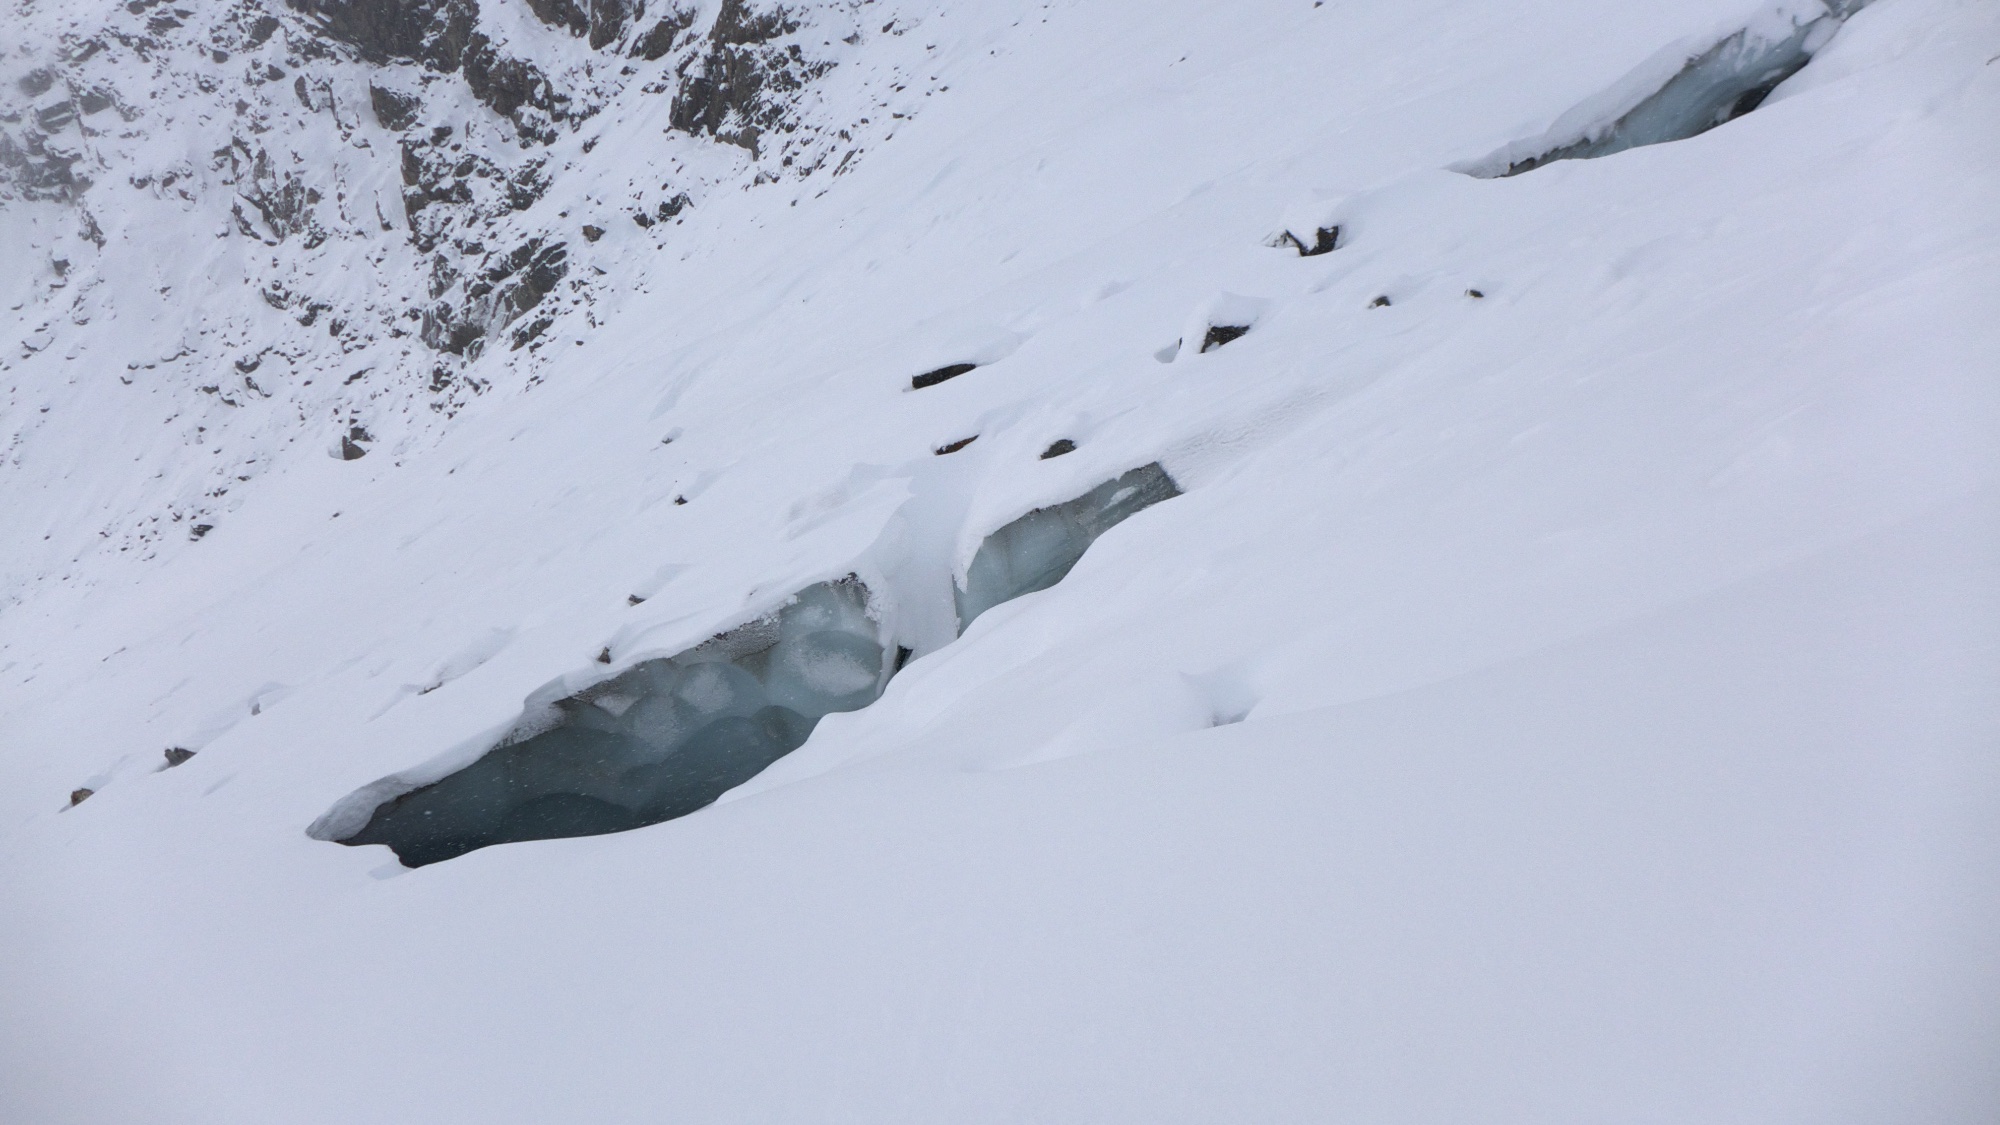 There were a few crevasses lurking around the edges of the glacier, we treaded carefully onwards.